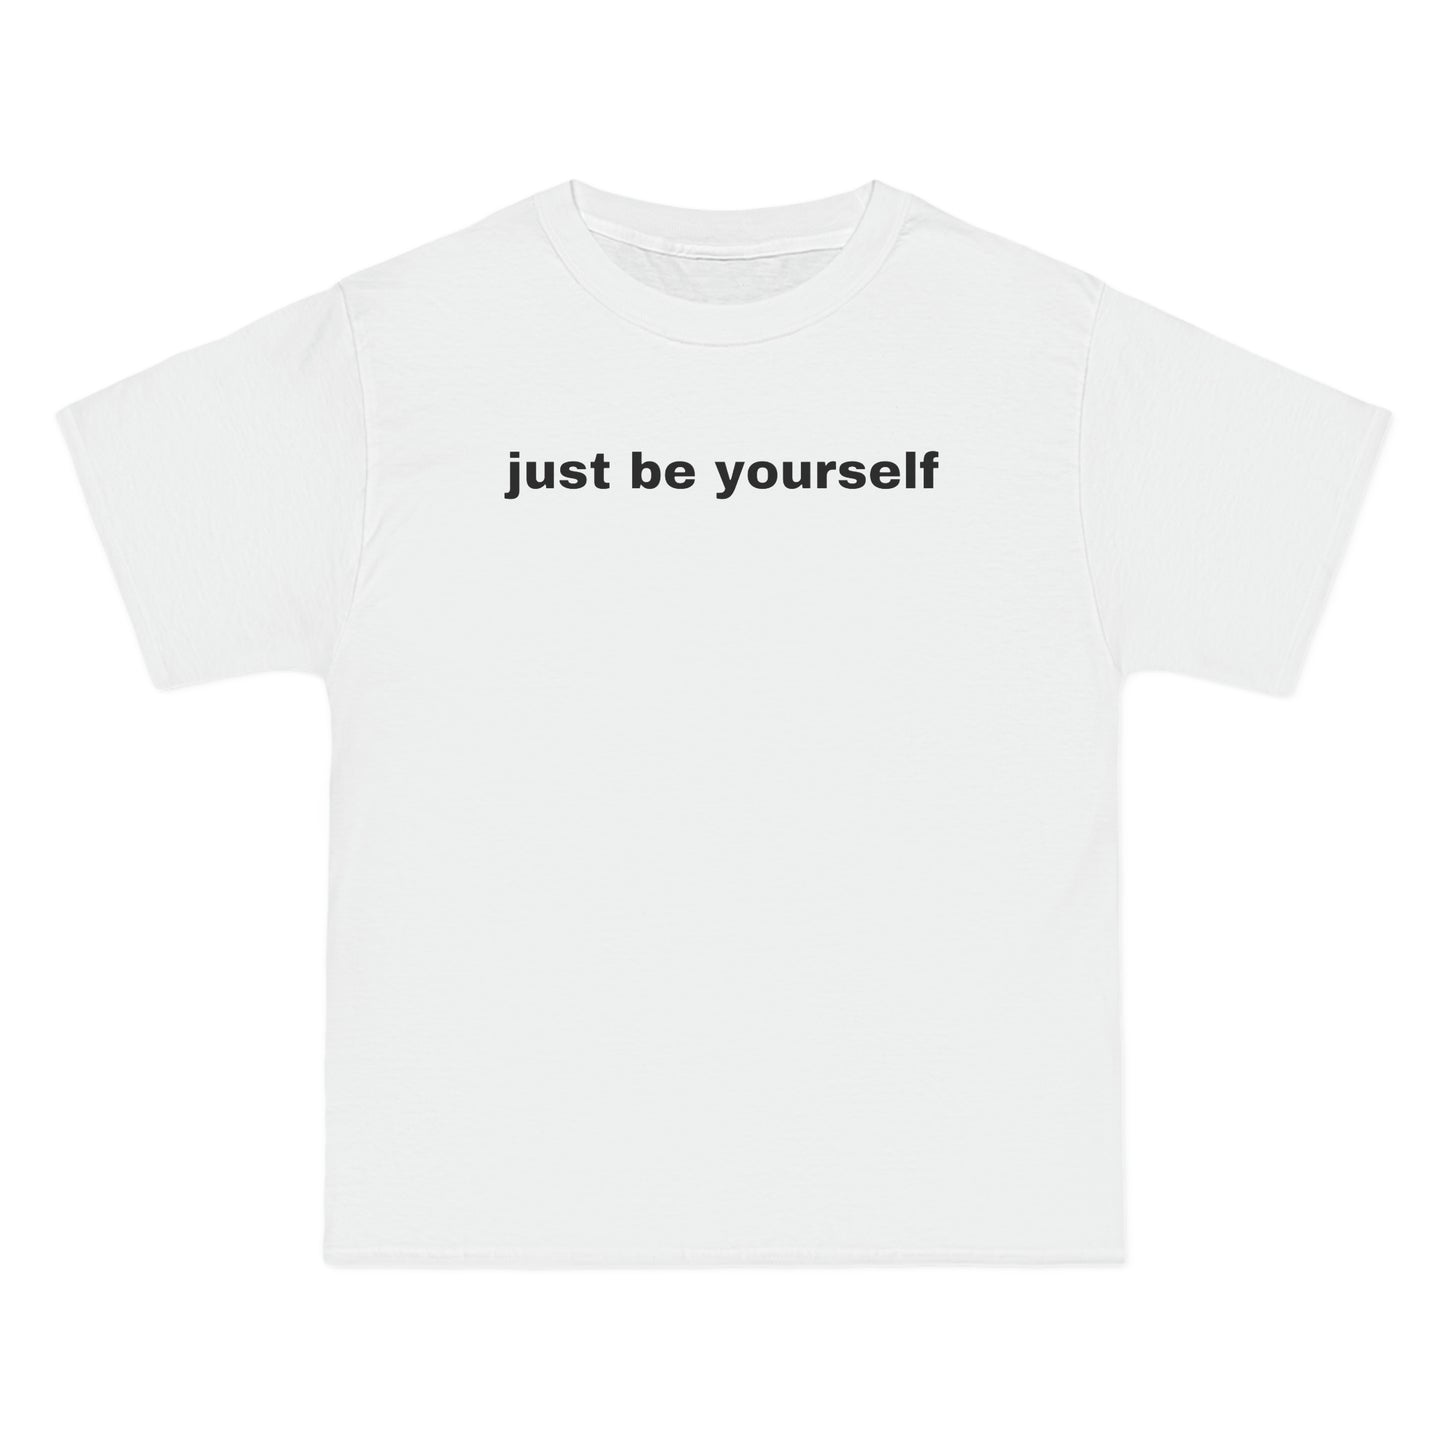 just be yourself Tee